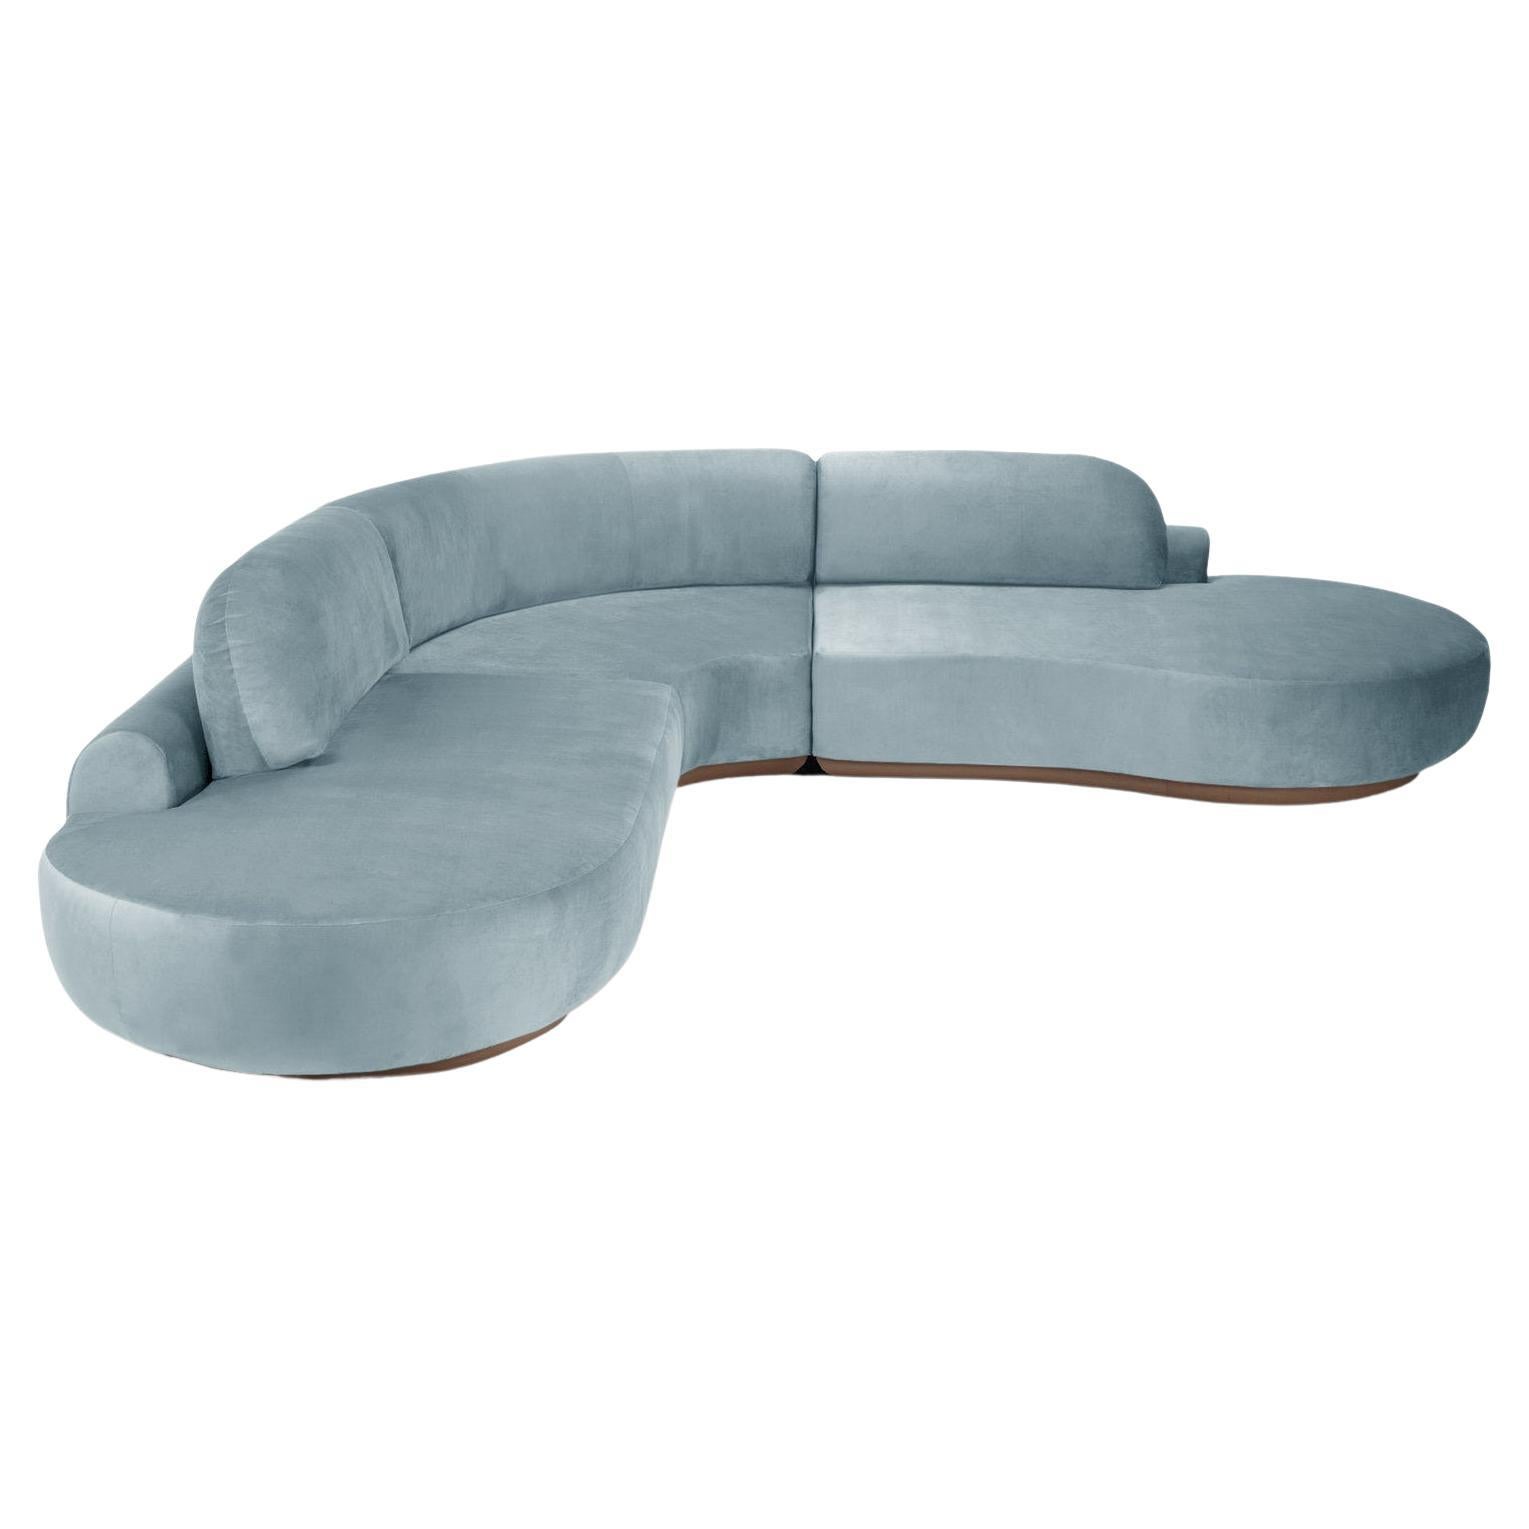 Naked Curved Sectional Sofa, 3 Piece with Beech Ash-056-1 and Paris Safira For Sale